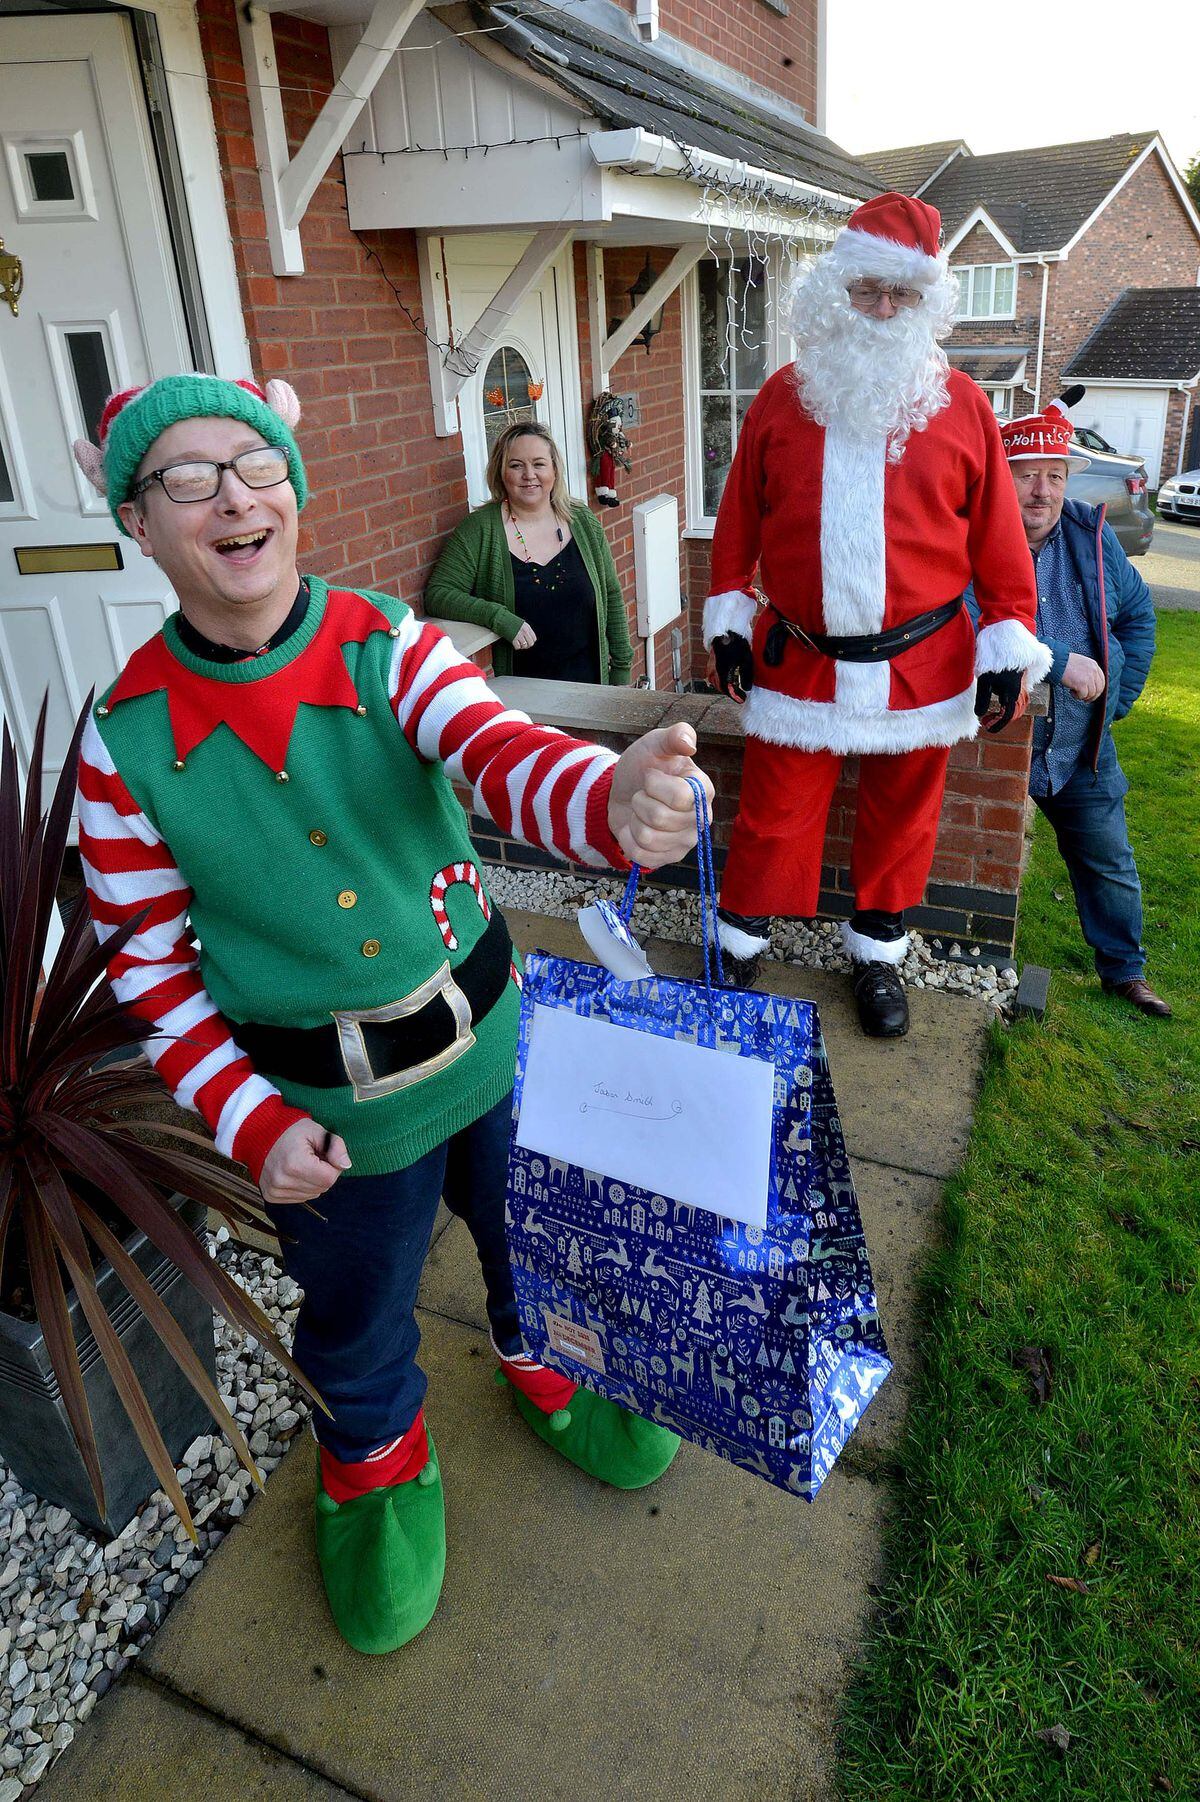 Santa paid a visit with helpers Cheryl Thomas and Chris Corfield